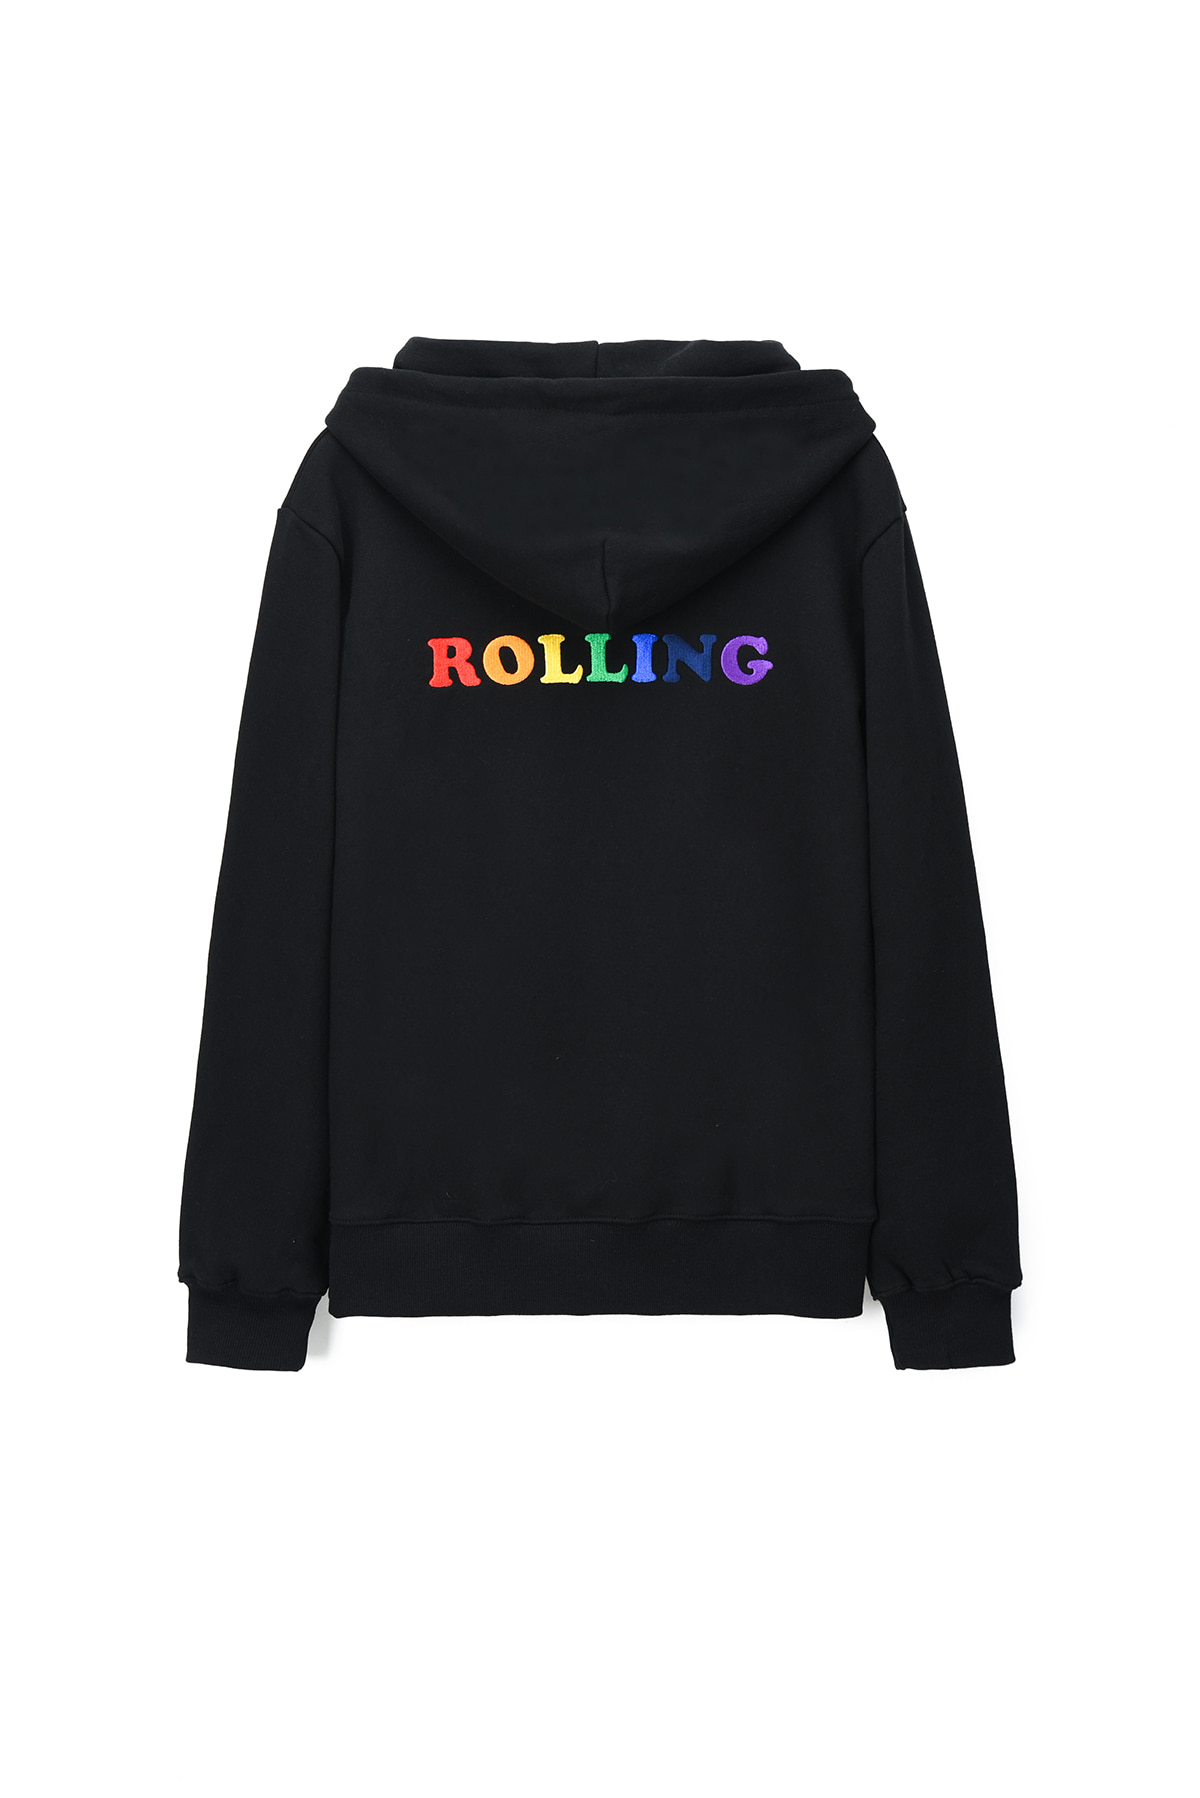 MIRRORBALL &amp; ROLLING RAINBOW EMBROIDERED CLASSIC HOODIE BLACK